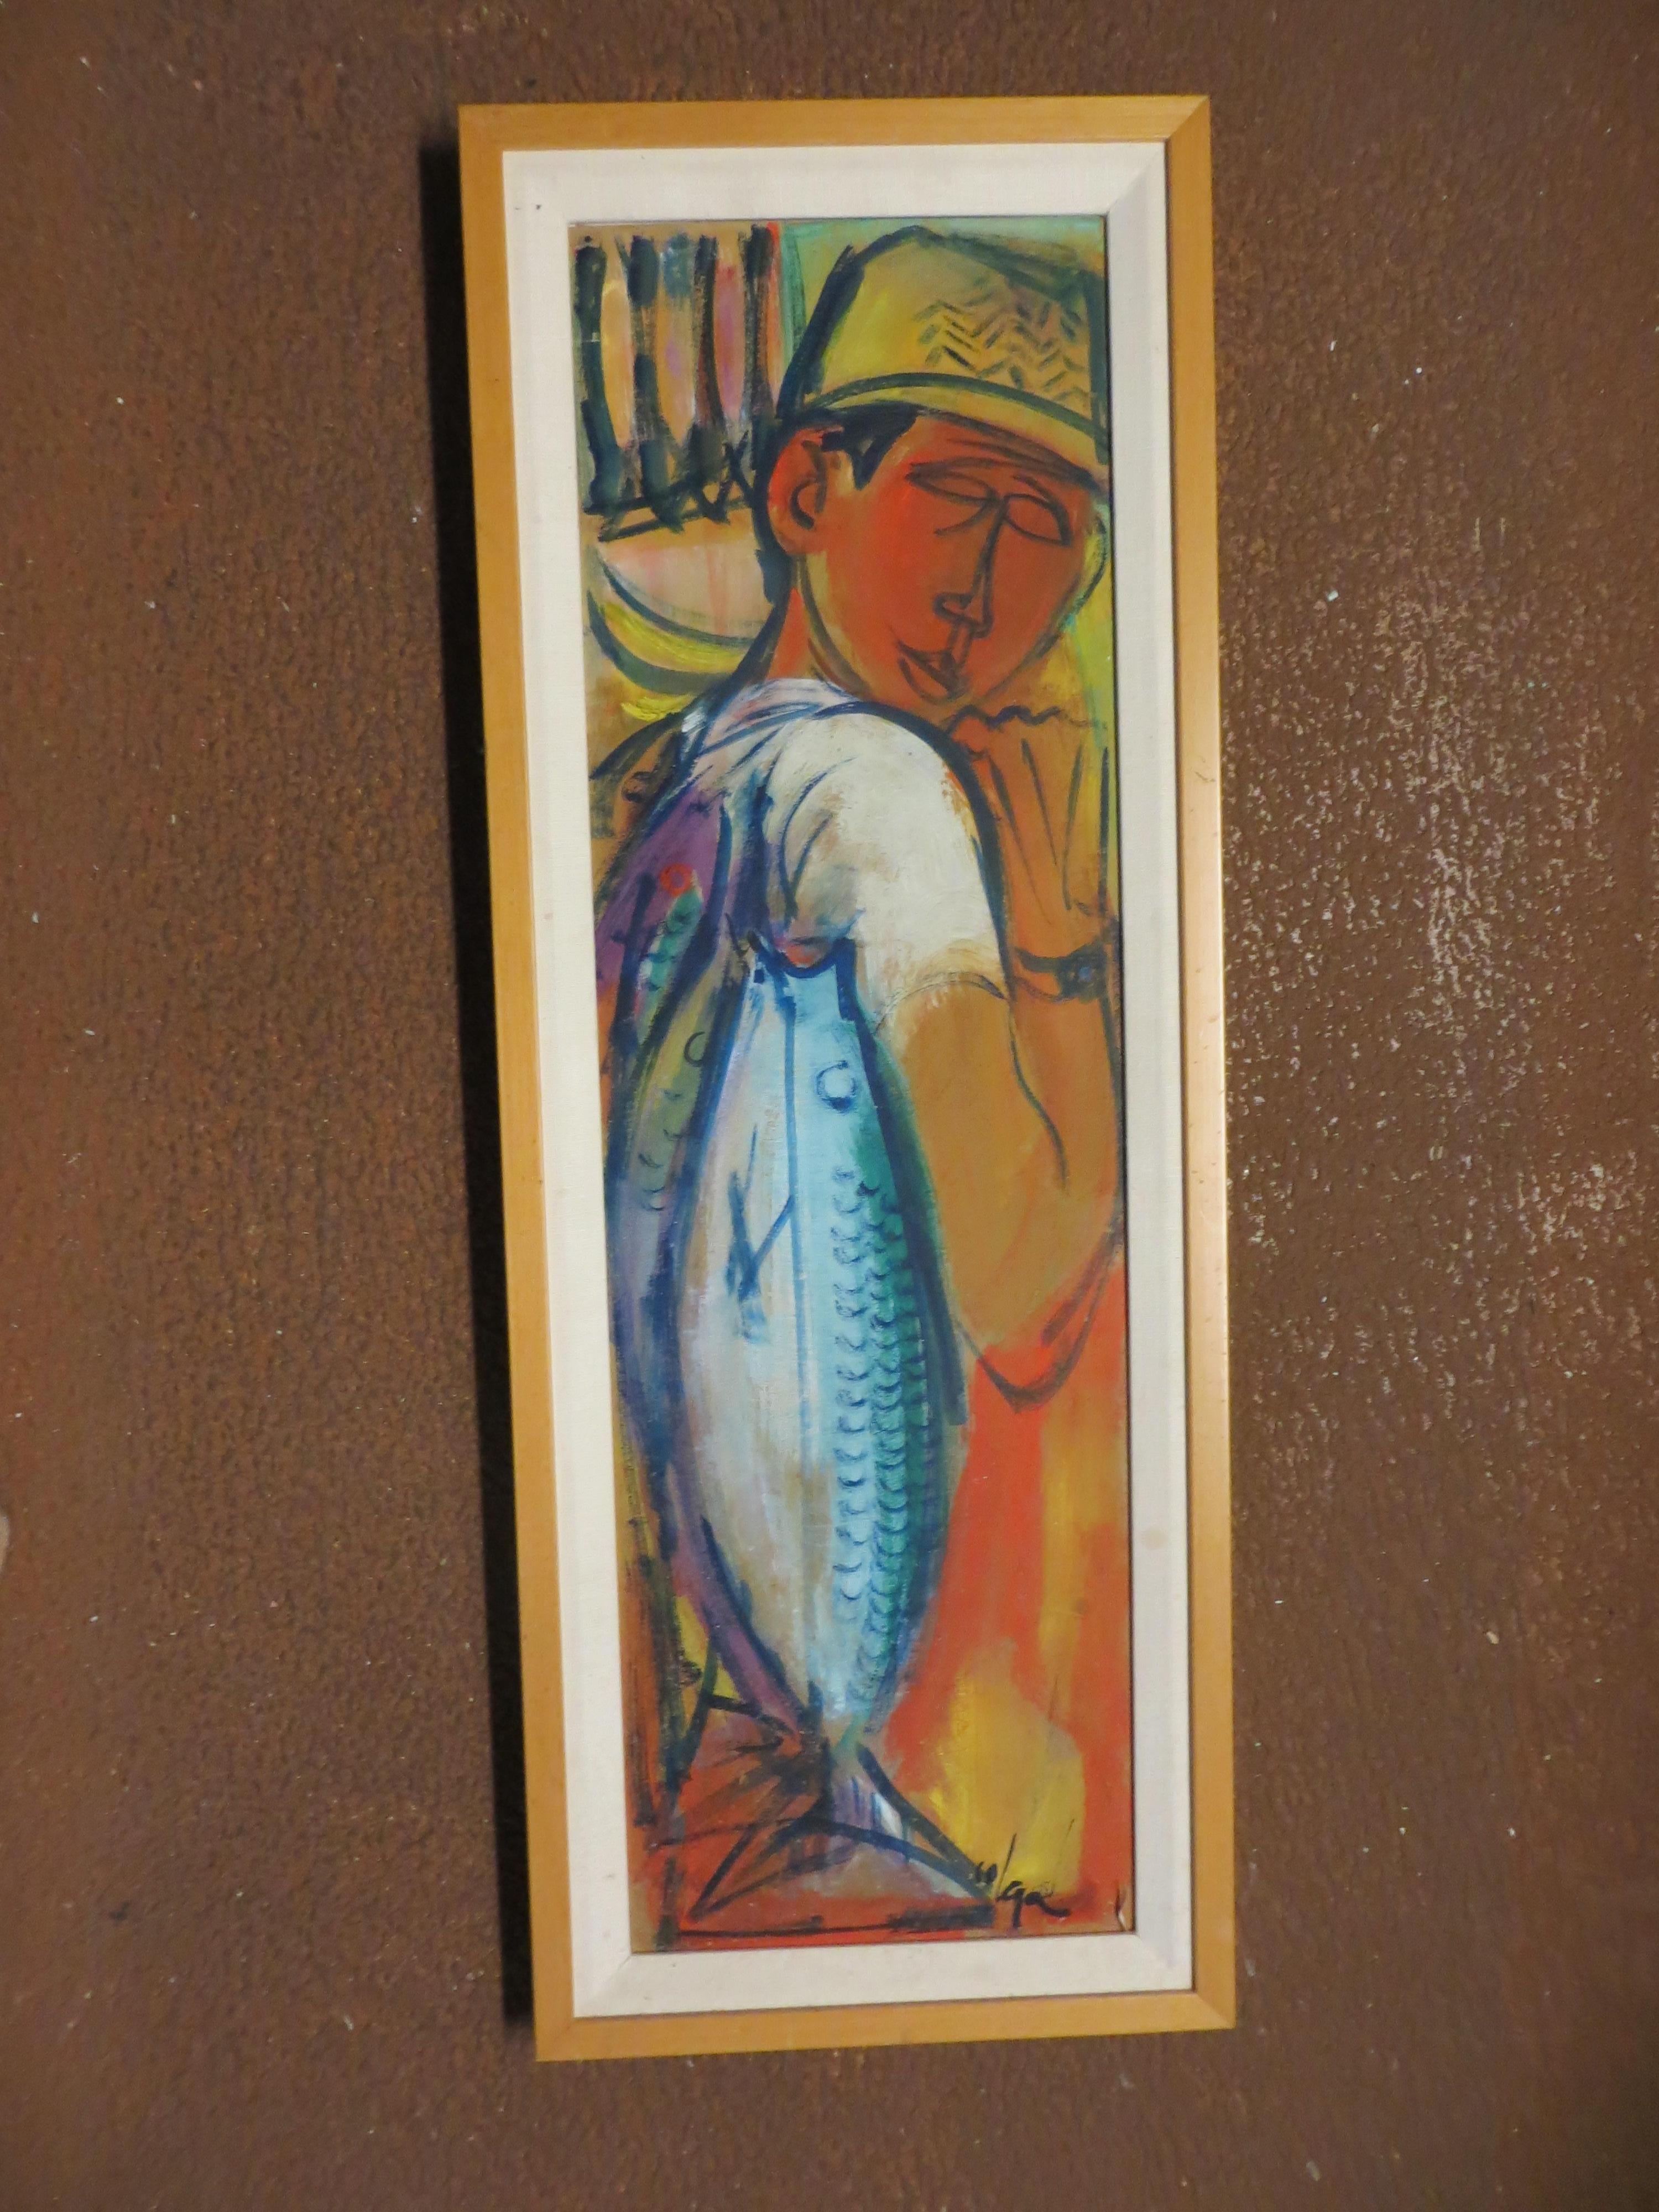 Fishing Boy - Brown Figurative Painting by Unknown